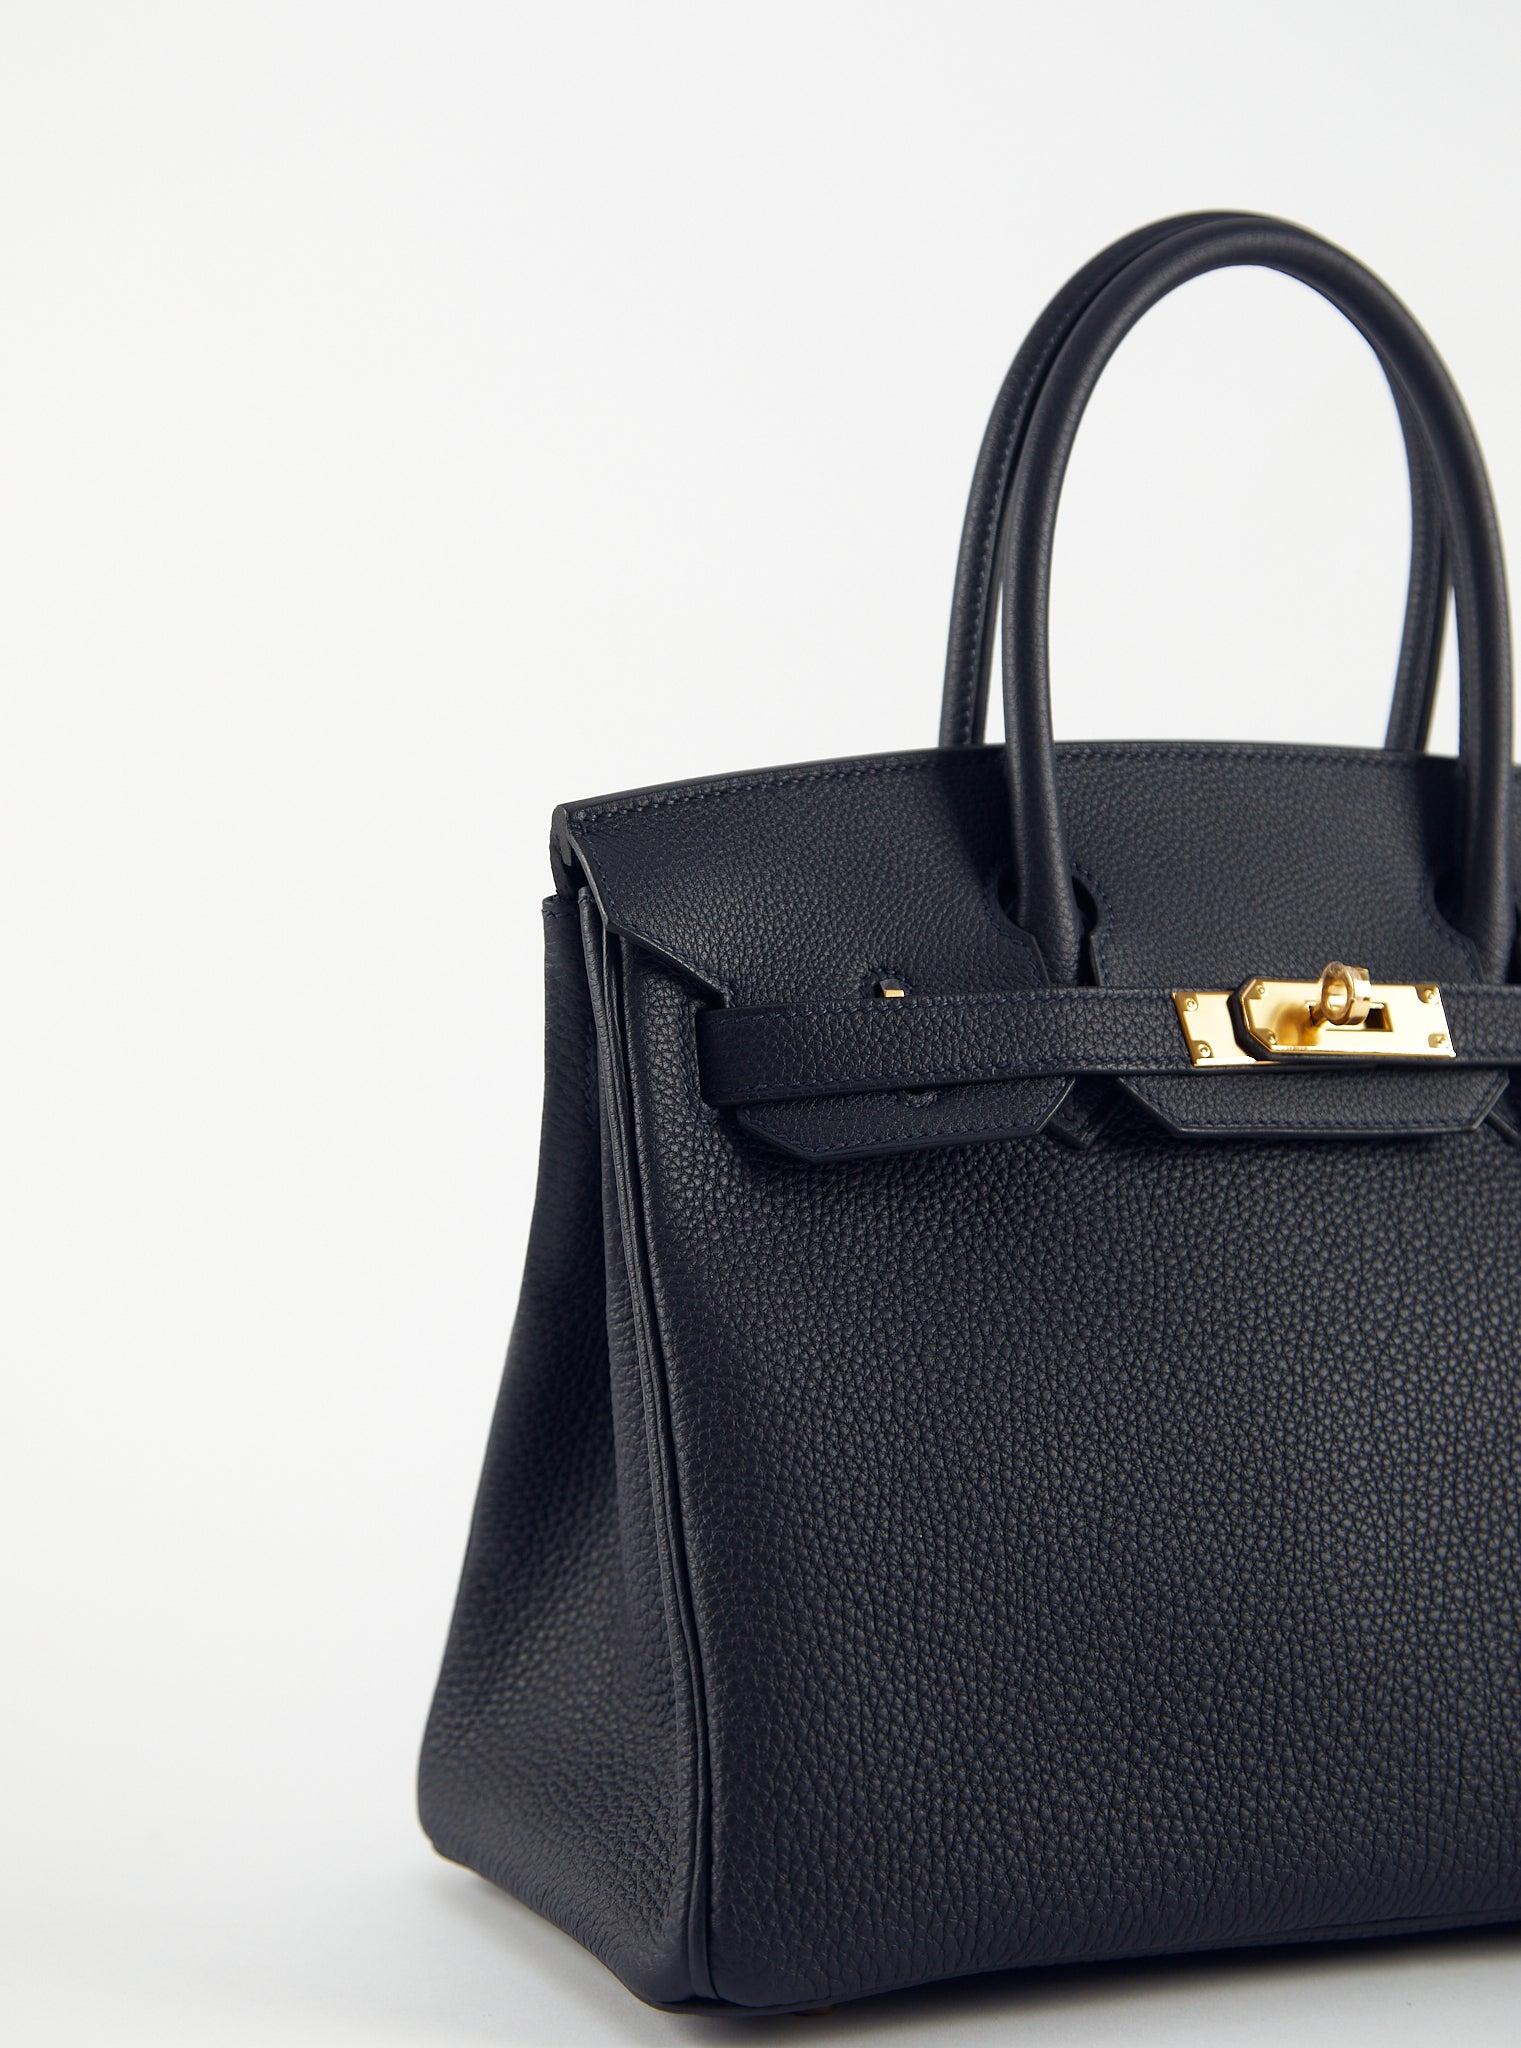 HERMÈS BIRKIN 30CM CABAN Togo Leather with Gold Hardware In Excellent Condition For Sale In London, GB